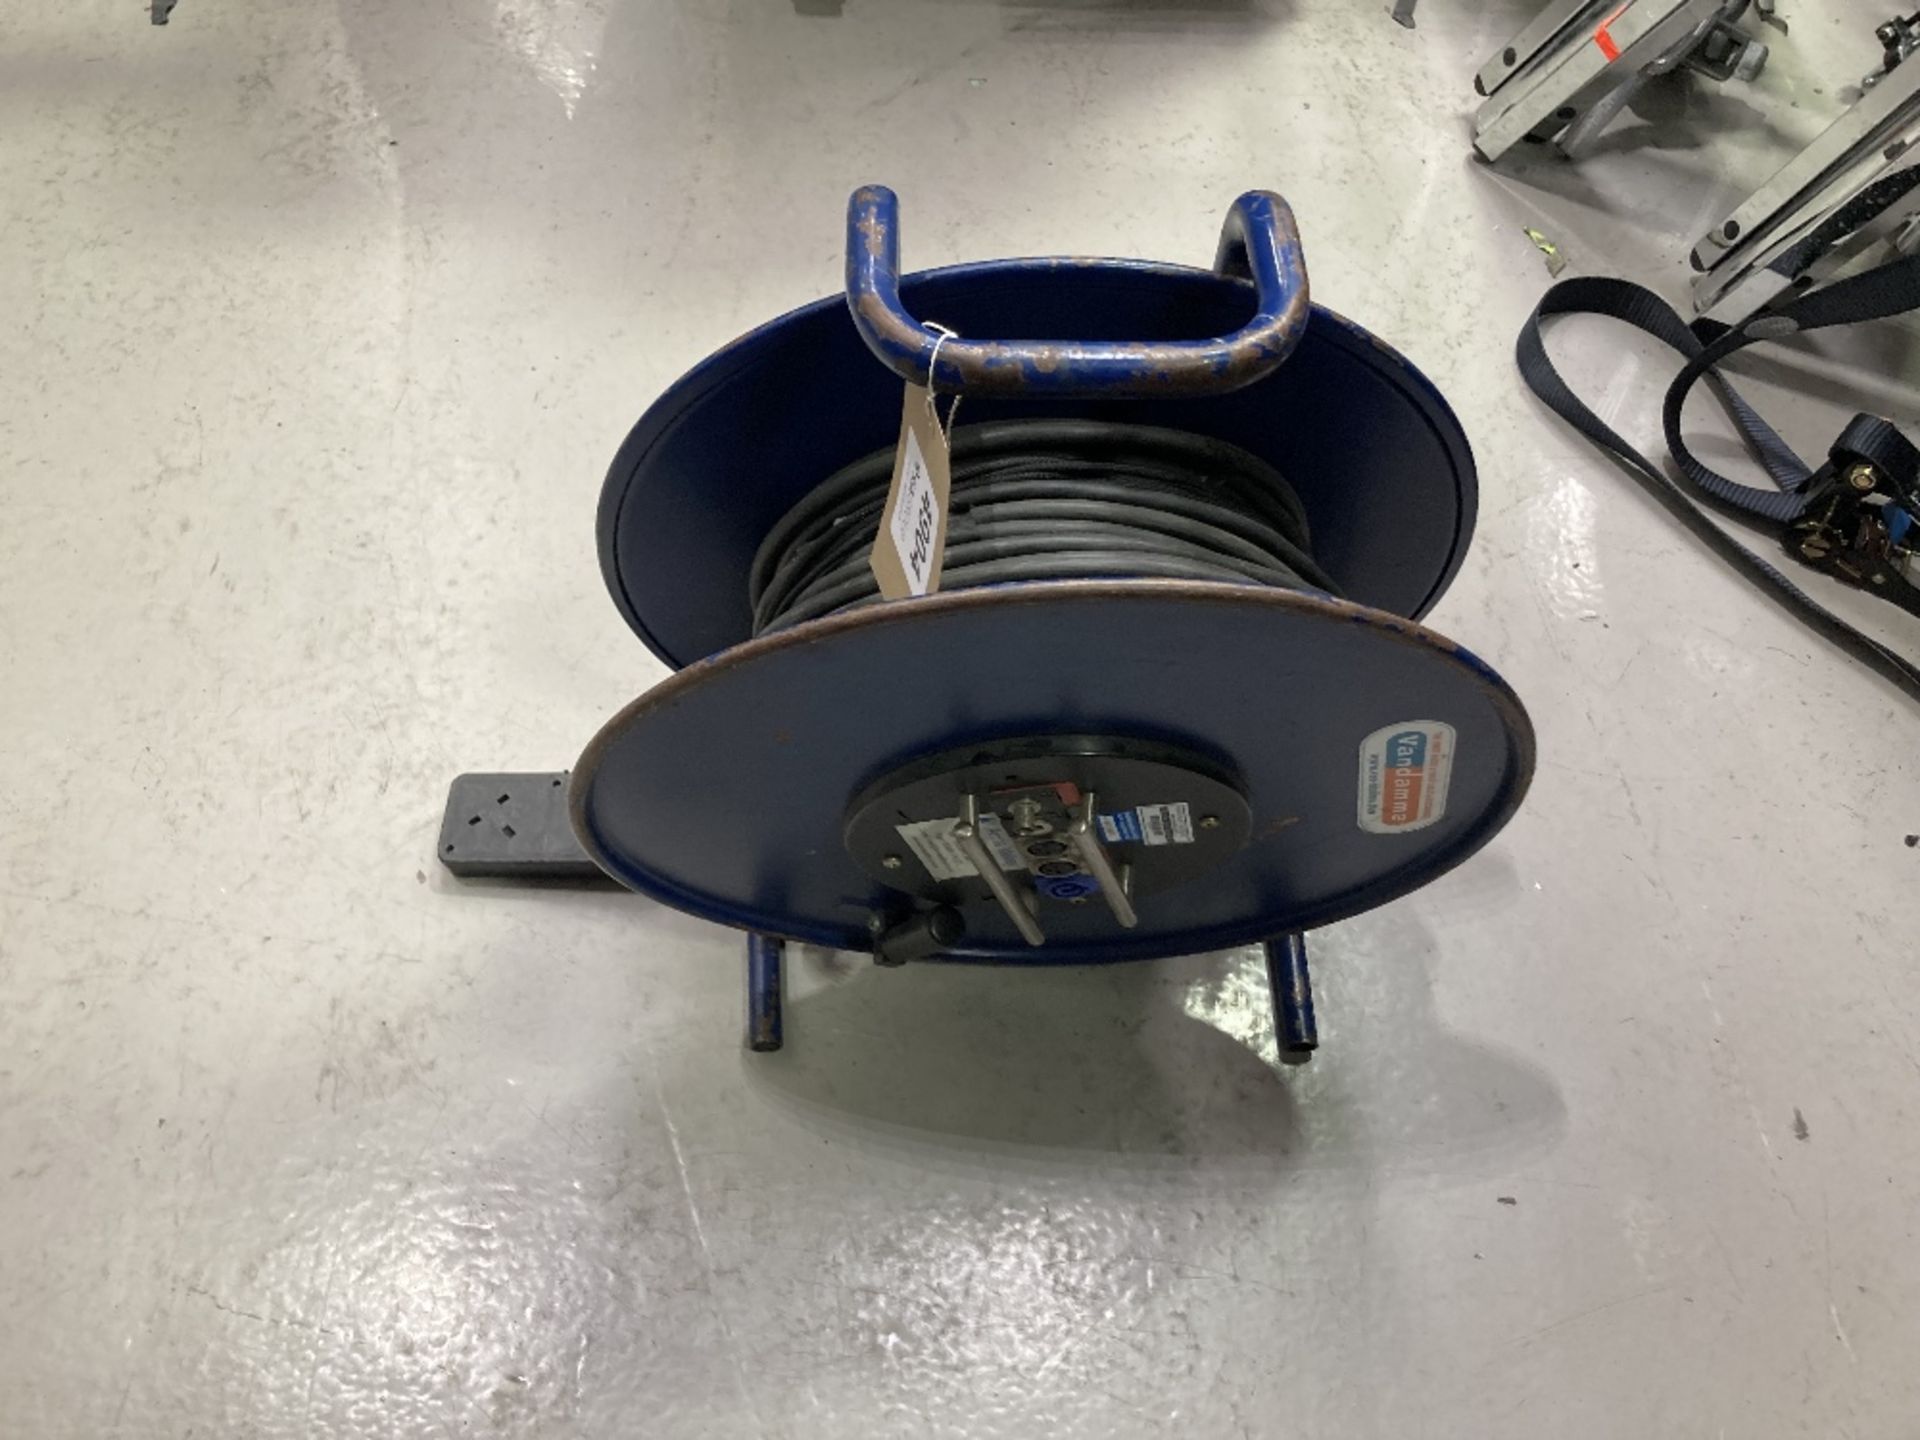 Socapex 50m - 6x 16amp F Fan Out Cable Reel - Image 3 of 3